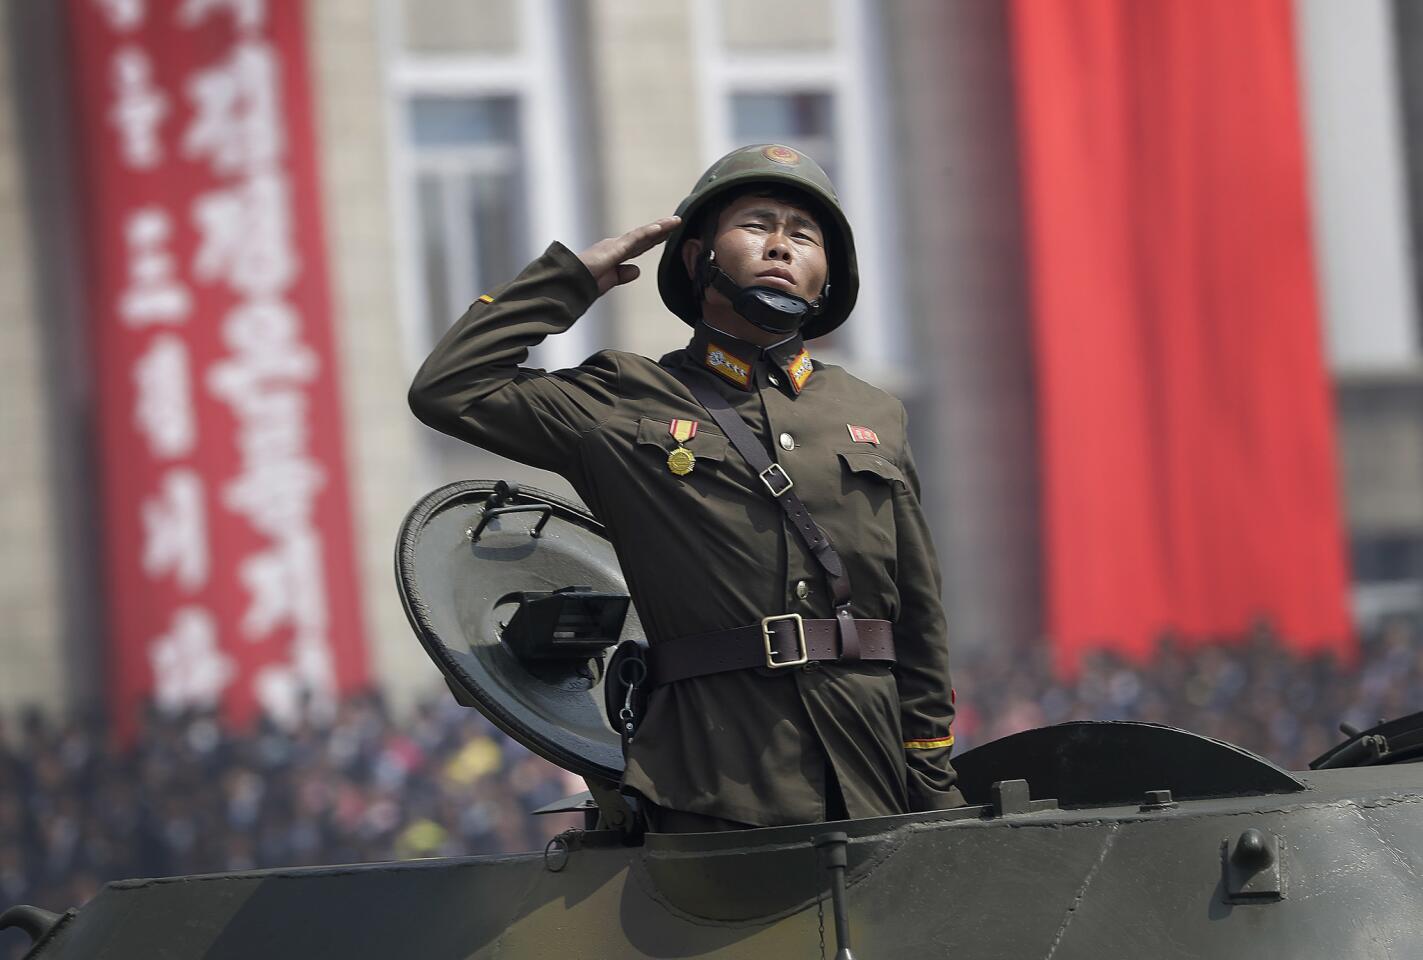 A soldier in a tank takes part in a military parade on Kim Il Sung Square in Pyongyang, North Korea, to celebrate the 105th anniversary of the birth of Kim Il Sung, the country's late founder and grandfather of current ruler Kim Jong Un.